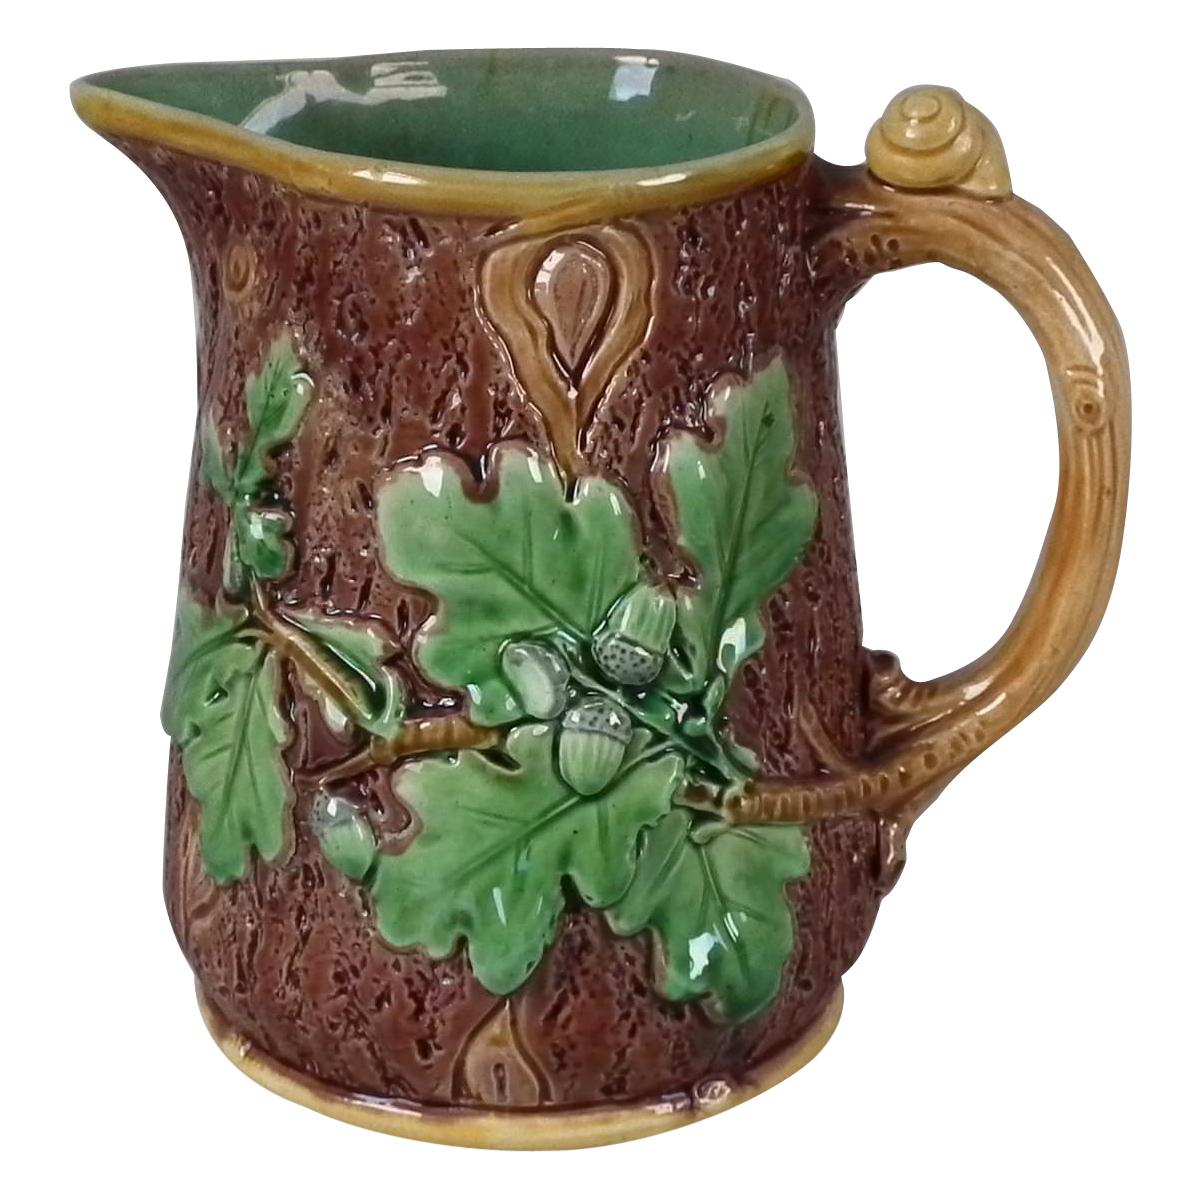 Victorian Minton Majolica Acorn and Snail Jug/Pitcher with Oak Leaves